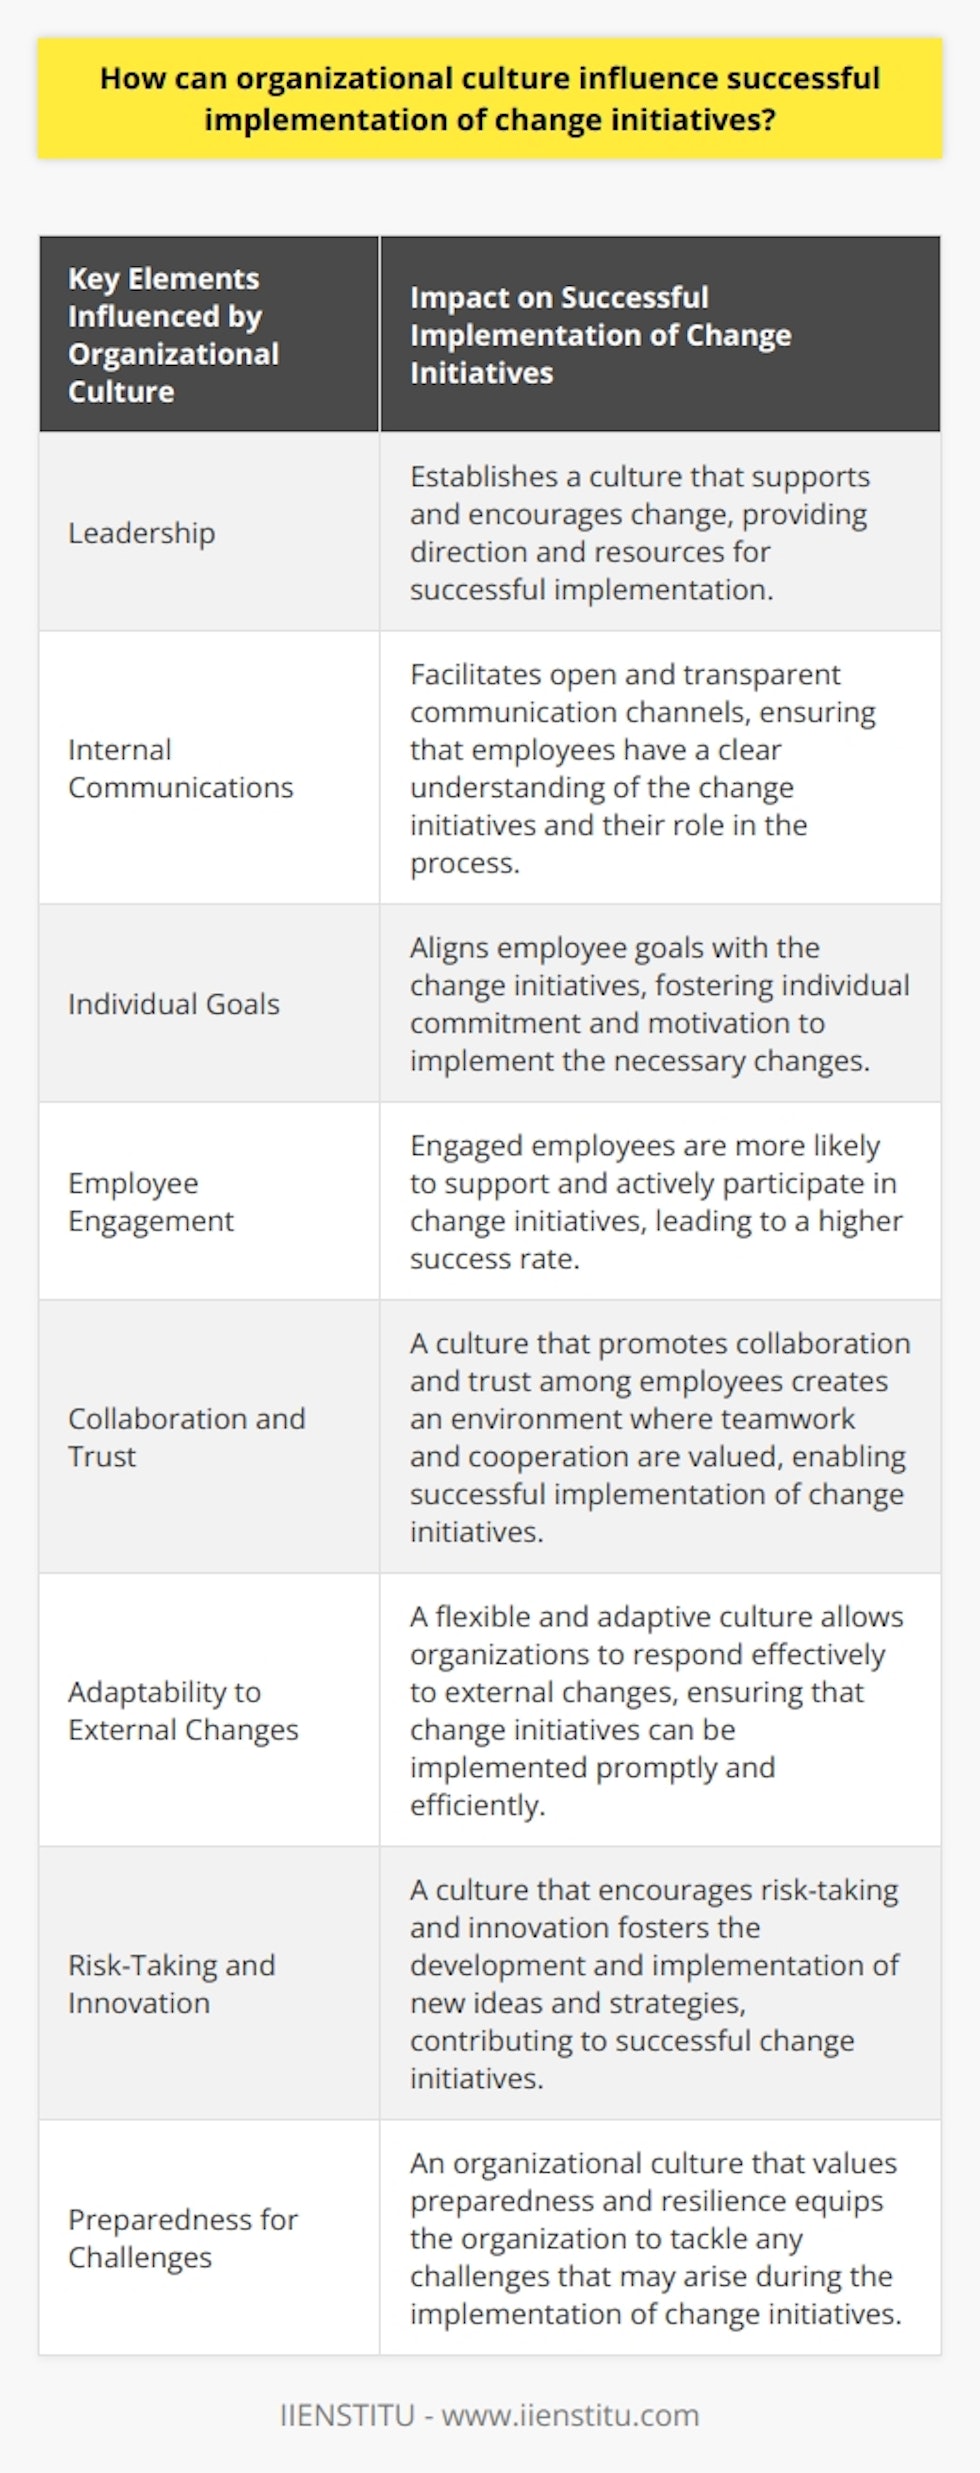 Organizational culture has a profound impact on the successful implementation of change initiatives within a company. Recognizing the importance of corporate culture and its influence on redirecting an organization's strategies and policies is crucial for achieving successful change. A strong and healthy organizational culture can greatly contribute to the success of change initiatives.Leadership, internal communications, and individual goals are key elements that establish an organizational culture. When these components are aligned and cohesive, they promote successful change initiatives. A healthy corporate culture fosters collaboration, open communication, and trust among employees, creating an environment where they can work together to bring about sustainable change.Motivating staff and encouraging their active participation are vital aspects influenced by organizational culture. Engaged employees who understand the purpose and significance of changes are more likely to support and successfully implement them. A unified and trusting workforce also promotes risk-taking and innovation, which are essential for organizations to stay competitive.Another important aspect influenced by organizational culture is the ability to respond to external industry changes. Organizations that are flexible and adaptive to changing industry landscapes are more likely to implement change initiatives effectively. Being able to adapt to different workflow processes and enabling teams to work together in response to rapidly changing market conditions is crucial. A strong organizational culture ensures that the organization is prepared to tackle any changes or challenges that may arise.In conclusion, organizational culture plays a significant role in the successful implementation of change initiatives. Leaders must create a culture that fosters safety, trust, engagement, and collaboration to best support the implementation of new ideas and strategies. Through thoughtful leadership, open communication, and motivating employees, organizations can establish a solid organizational culture that sets the stage for successful change initiatives.